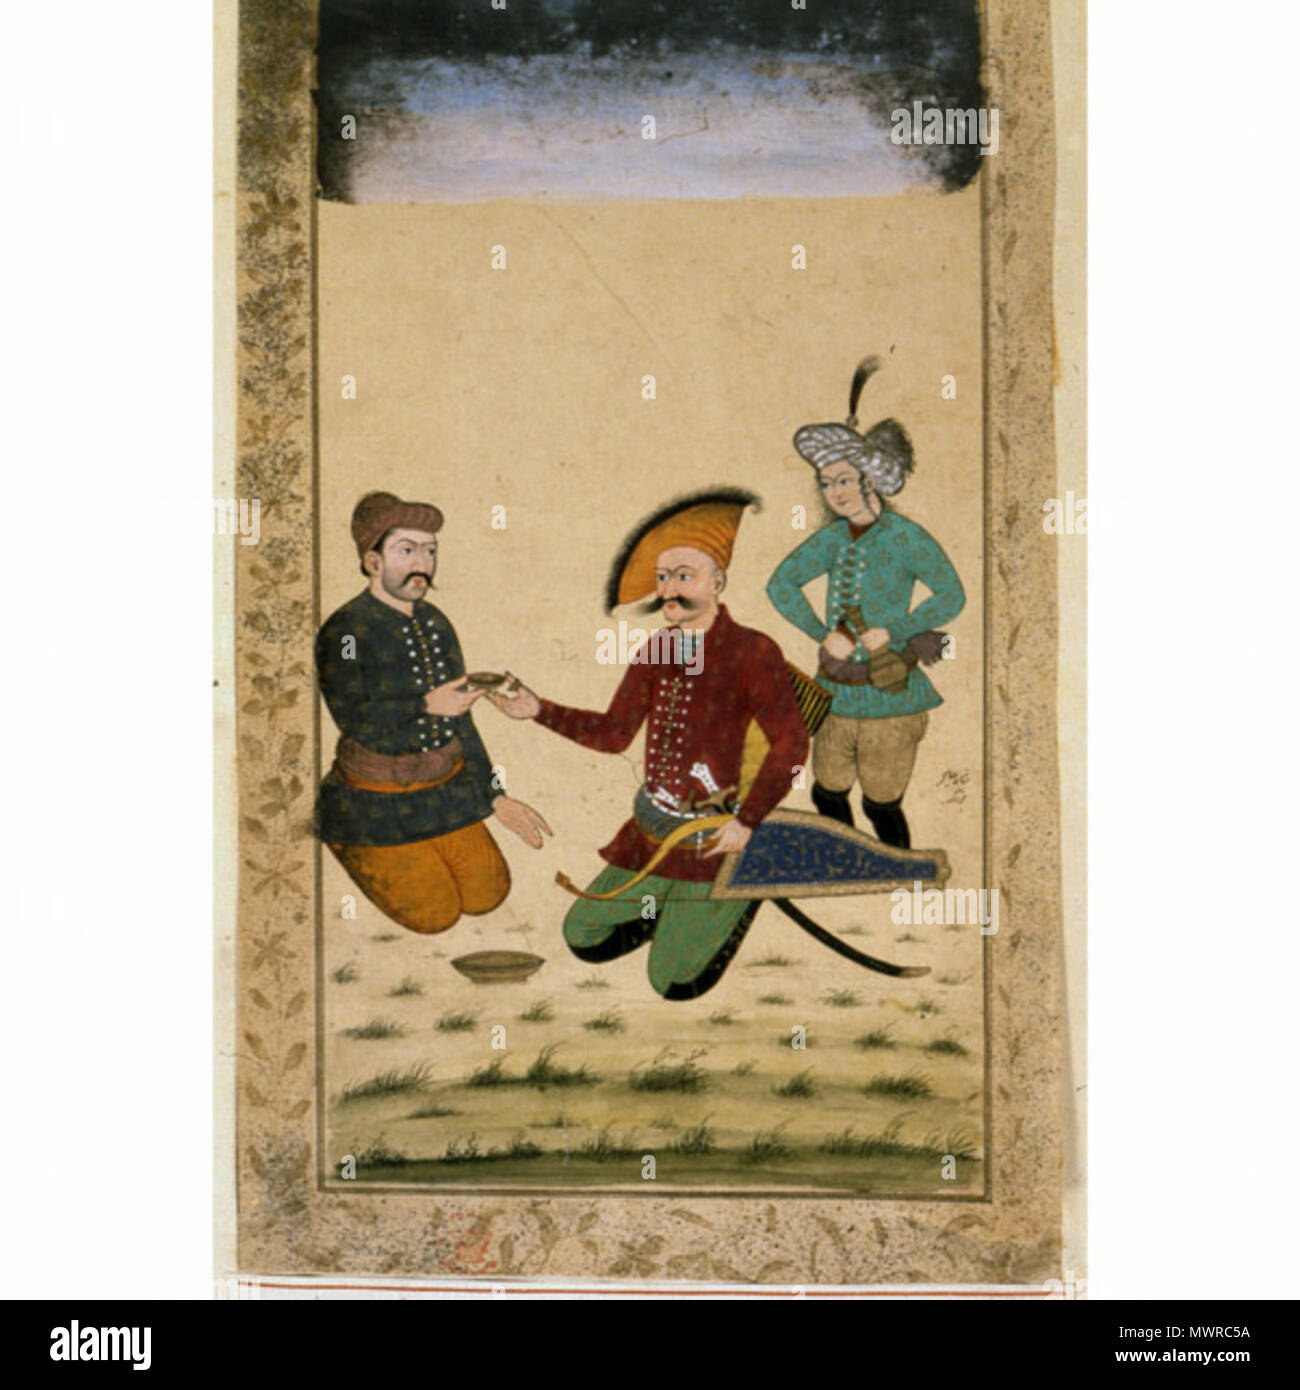 . English: Painting of Shah 'Abbas, Khan 'Alam and a page [Painting of Shah 'Abbas, Khan 'Alam and a page] India, Golconda, late AD 1600s  This painting shows the meeting of Shah 'Abbas I of Iran (1571-1629) and Khan 'Alam, the ambassador of Mughal India, at the former Safavid capital, Qazvin in 1618. Their meeting was recorded by a Mughal court artist, and this image is most likely based on one of the preparatory painted sketches made of the key figures. Mughal India was Iran's largest trading partner, supplying textiles, spices and other merchandise. Indian goods reached Iran in such quantit Stock Photo